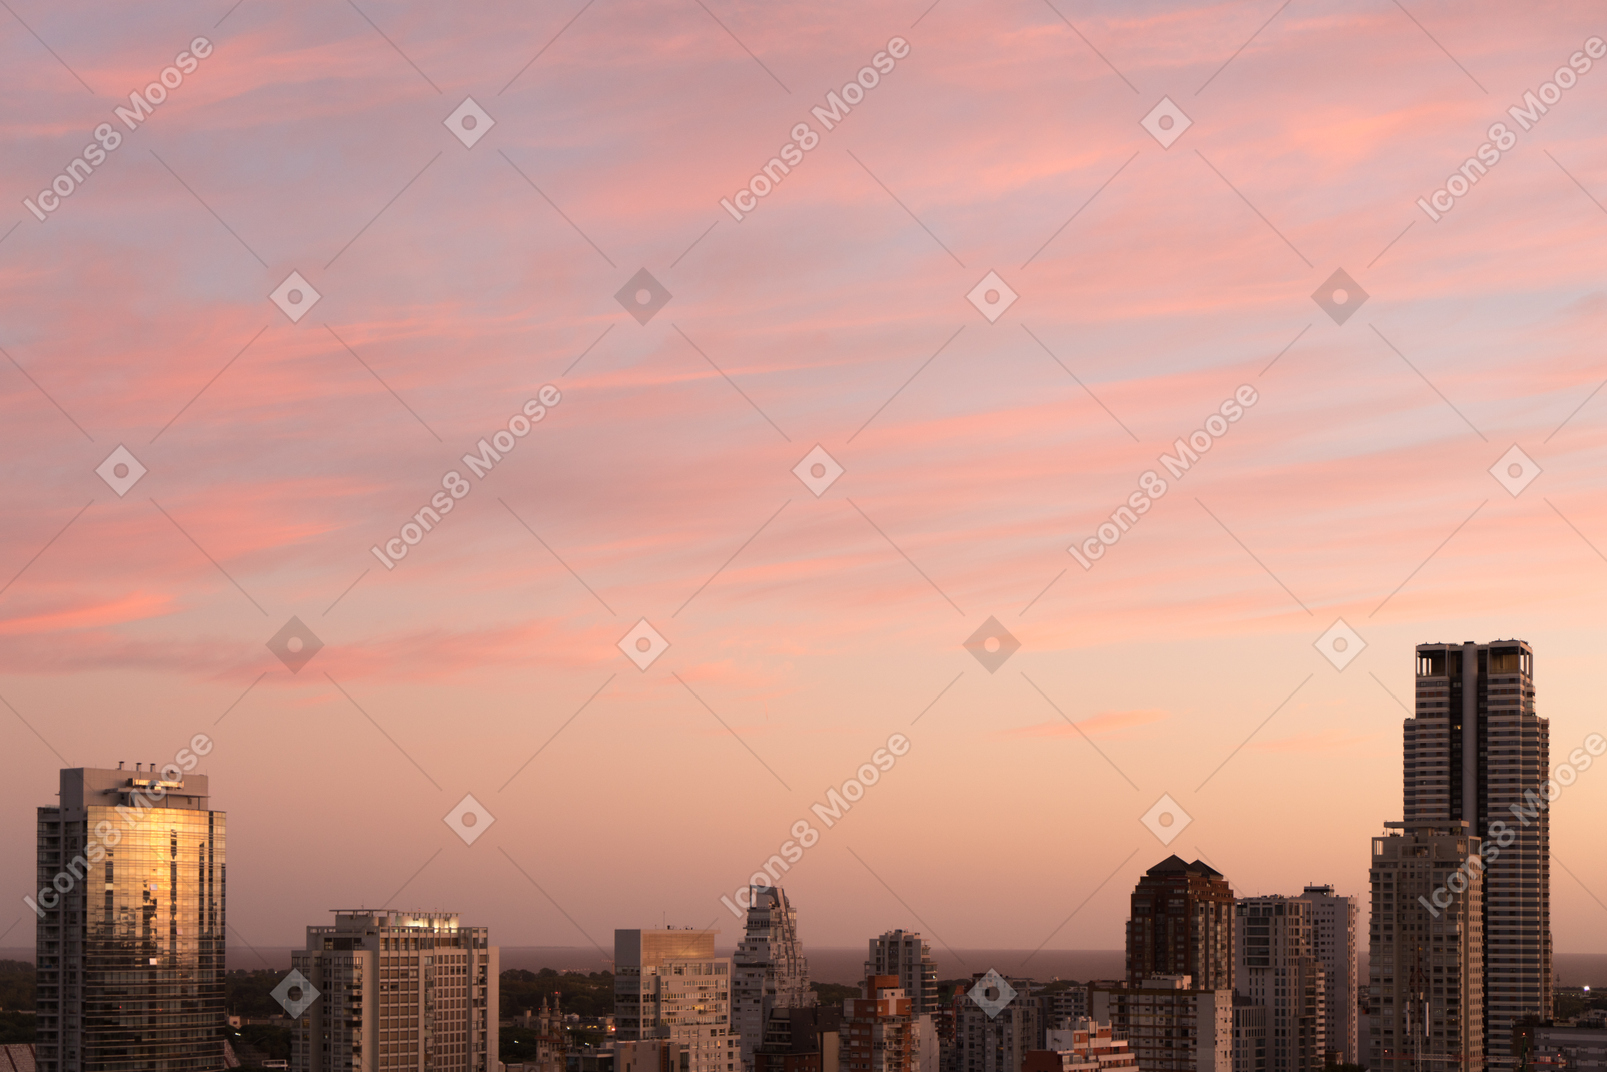 The view of the city at pink dawn